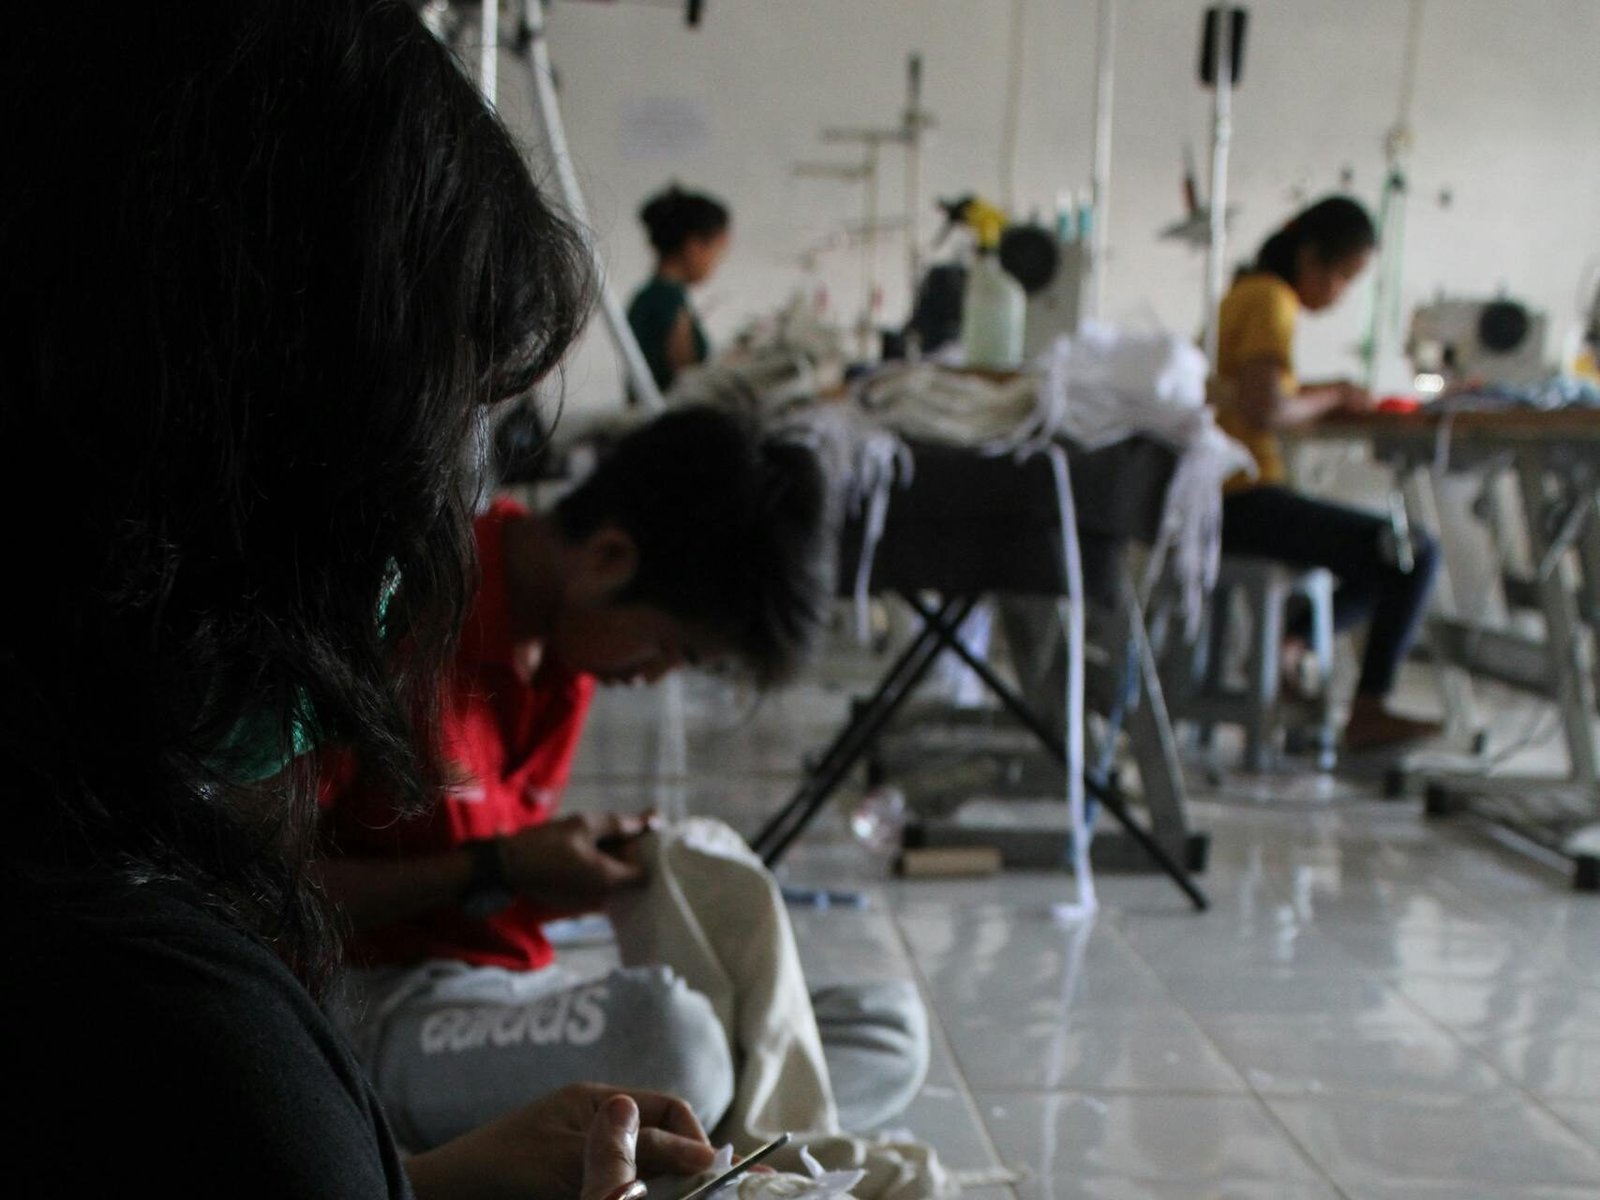 People Working in a Garments Business